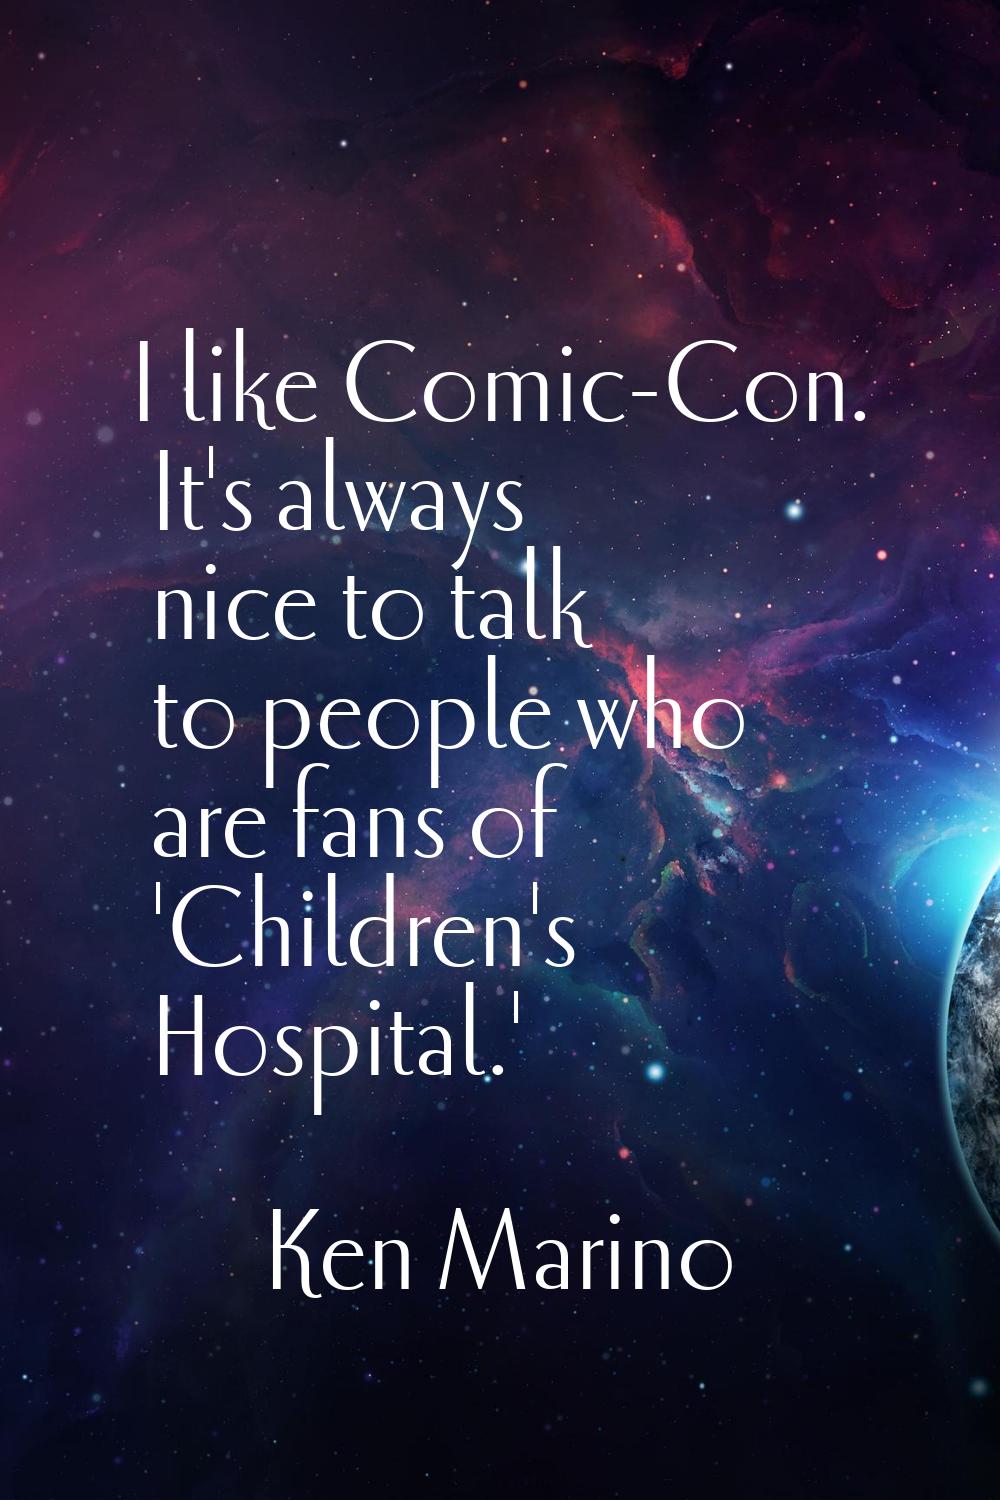 I like Comic-Con. It's always nice to talk to people who are fans of 'Children's Hospital.'